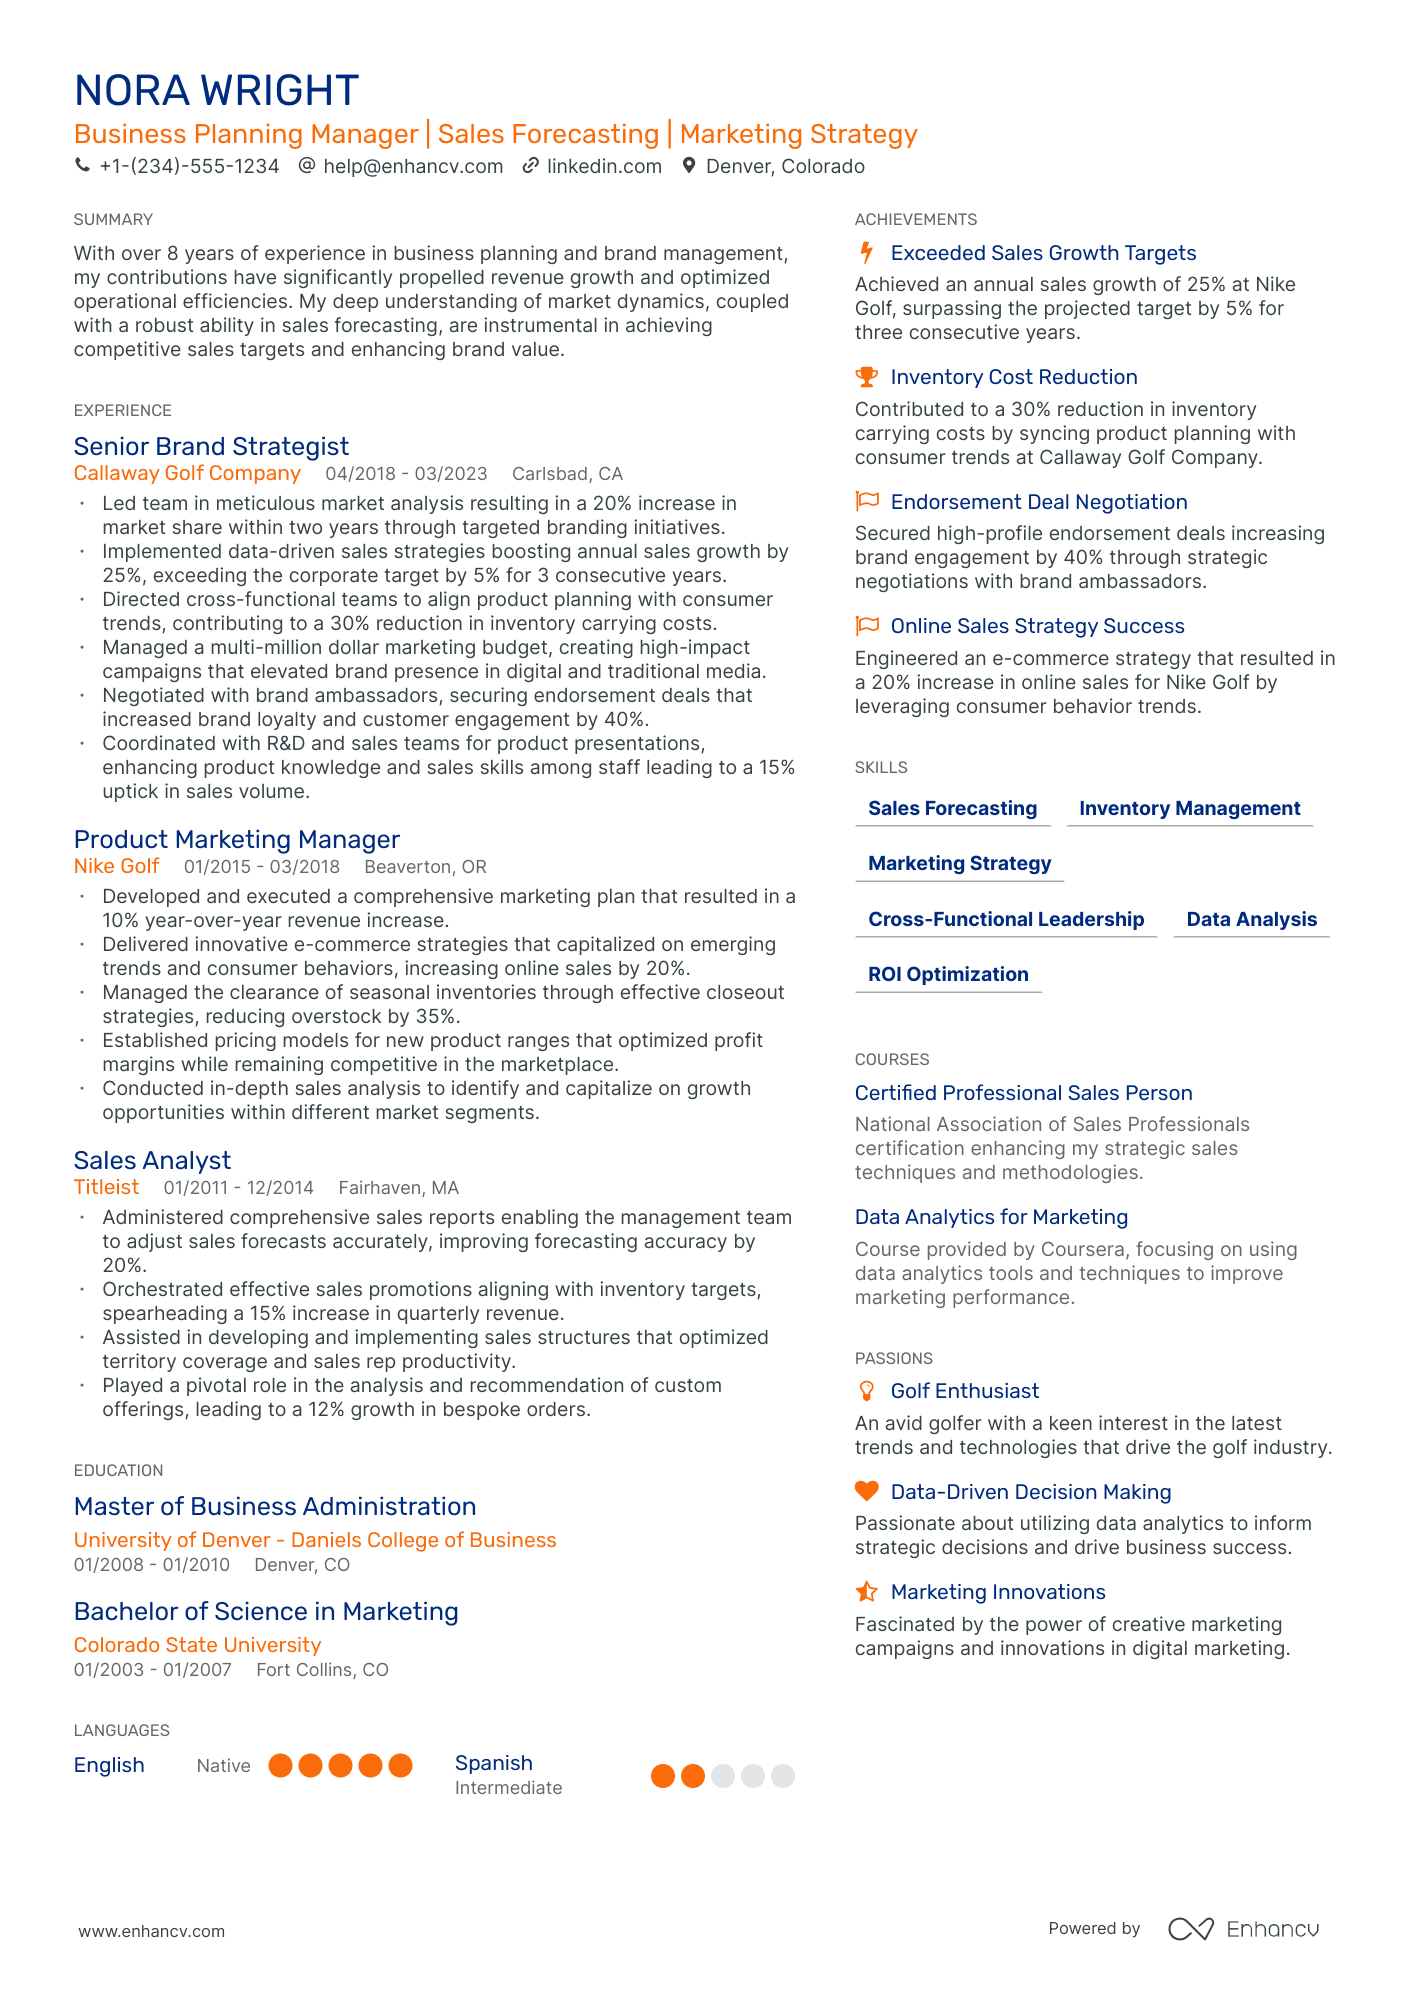 business planning manager resume